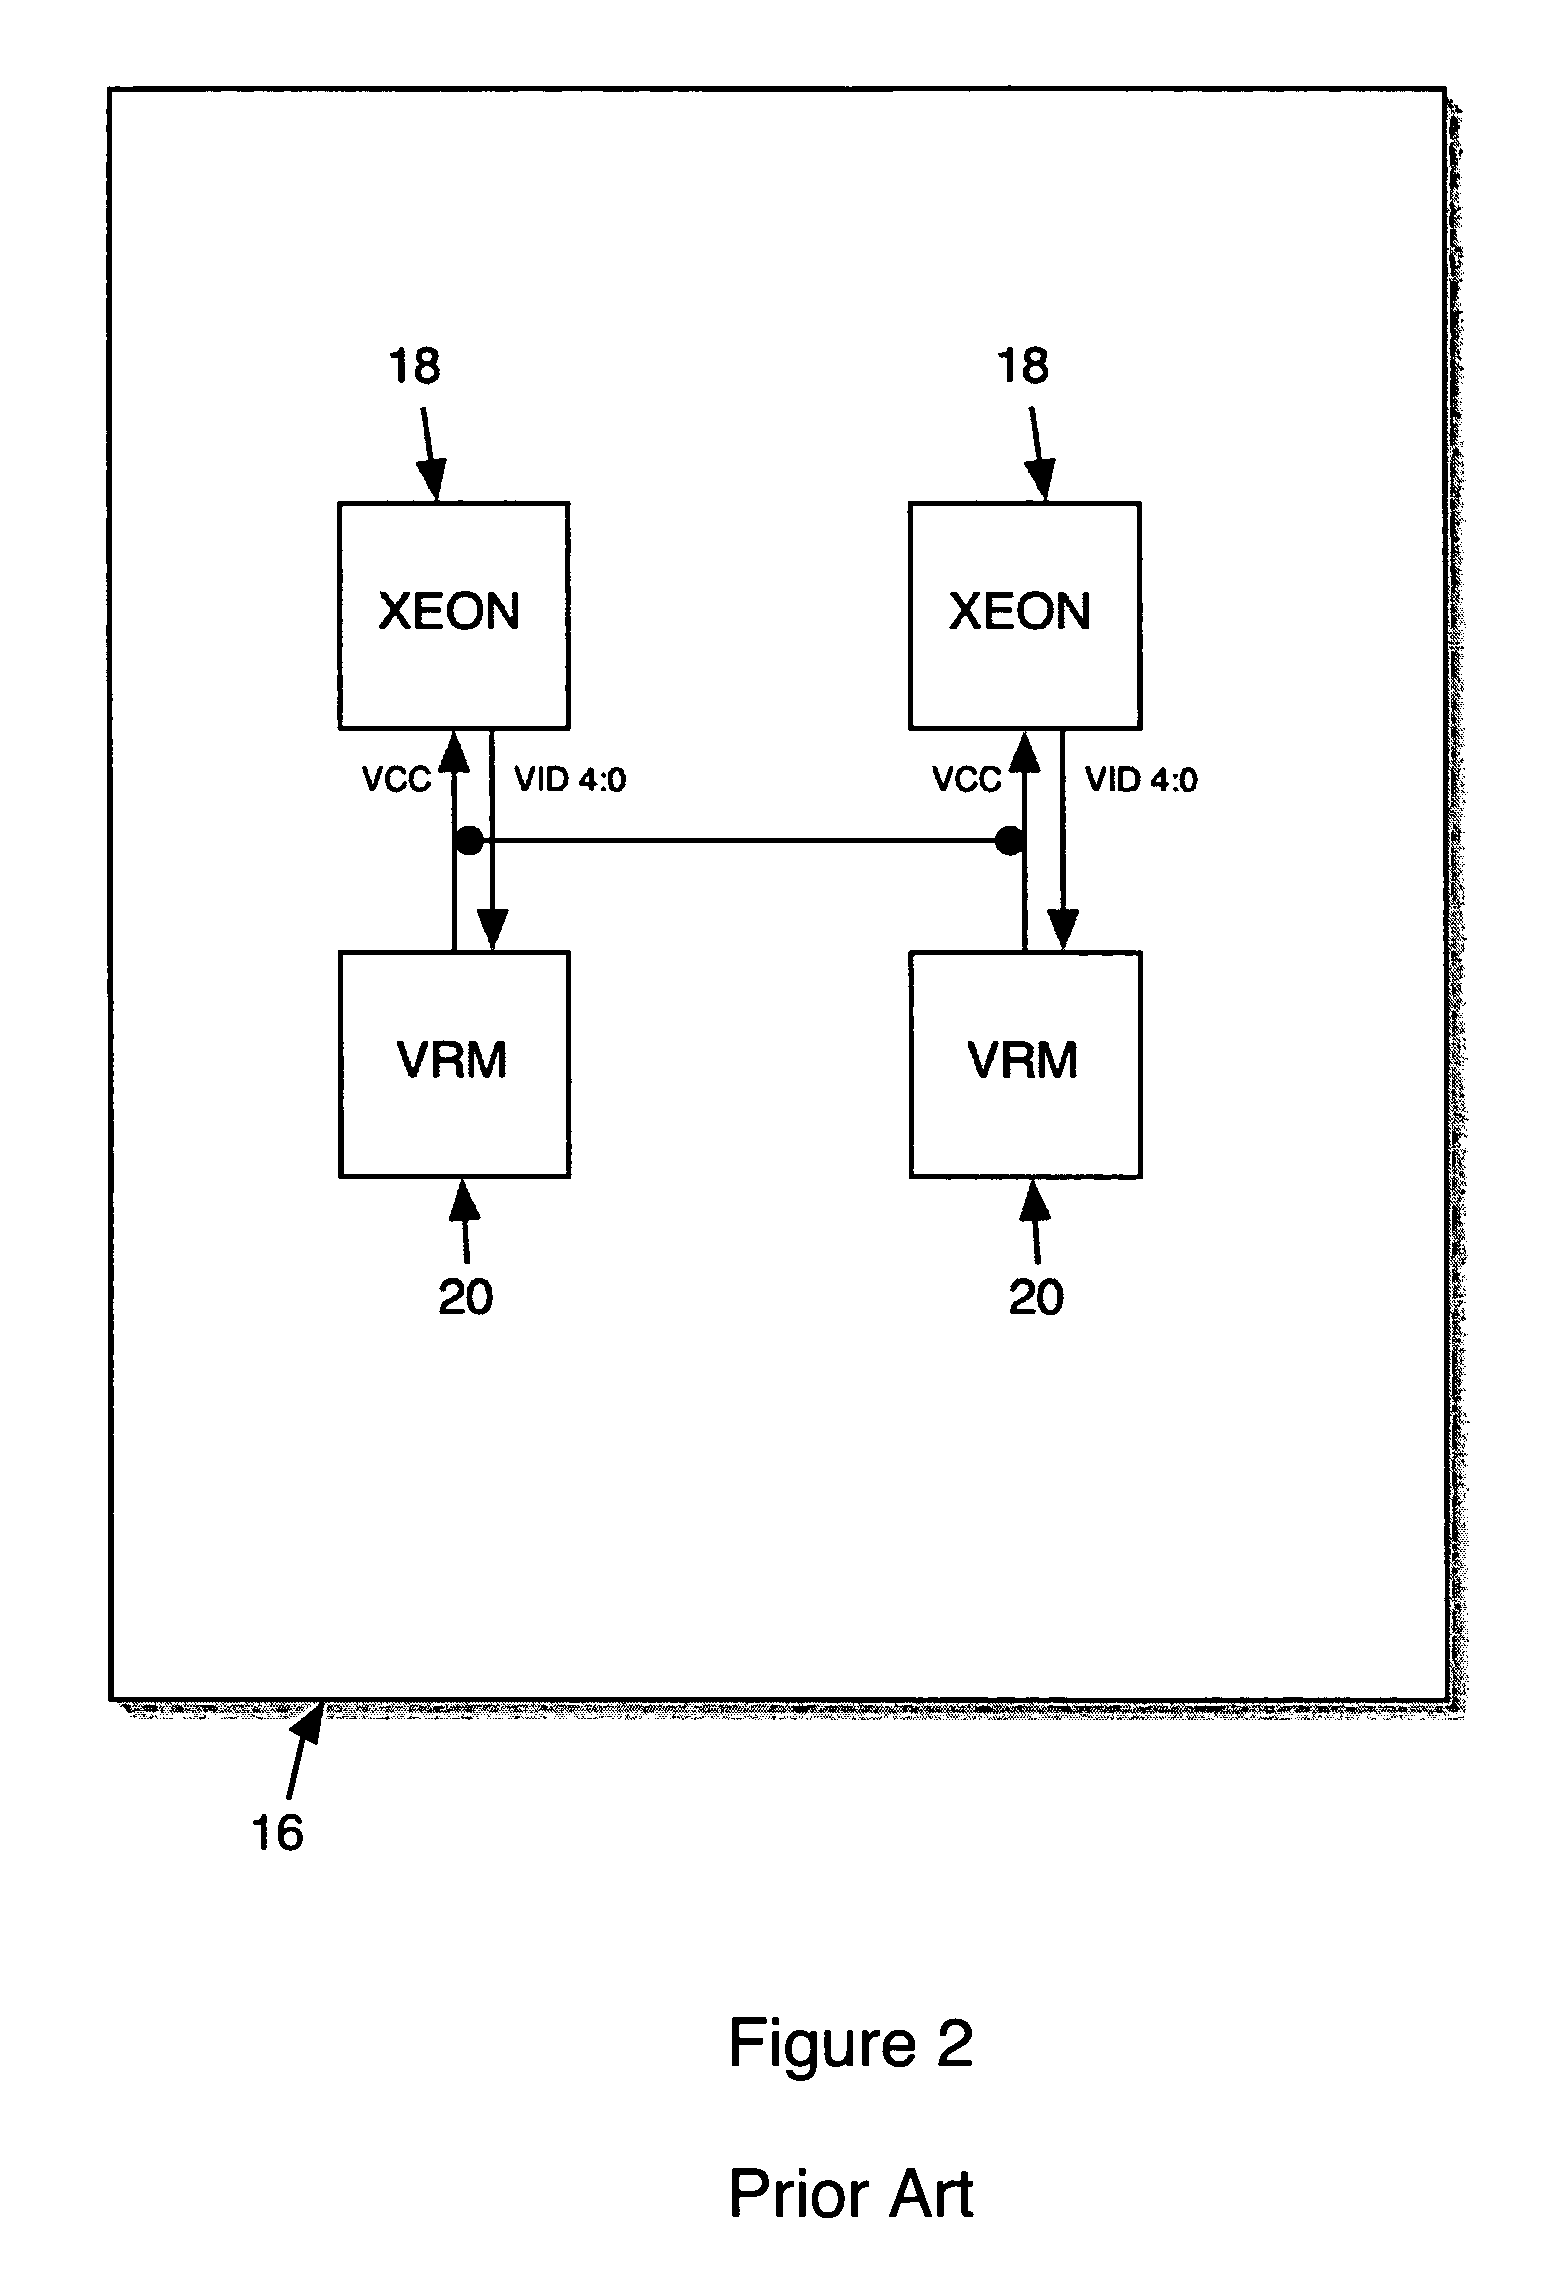 Use of one voltage regulator module to support two processors to improve power and thermal limitations